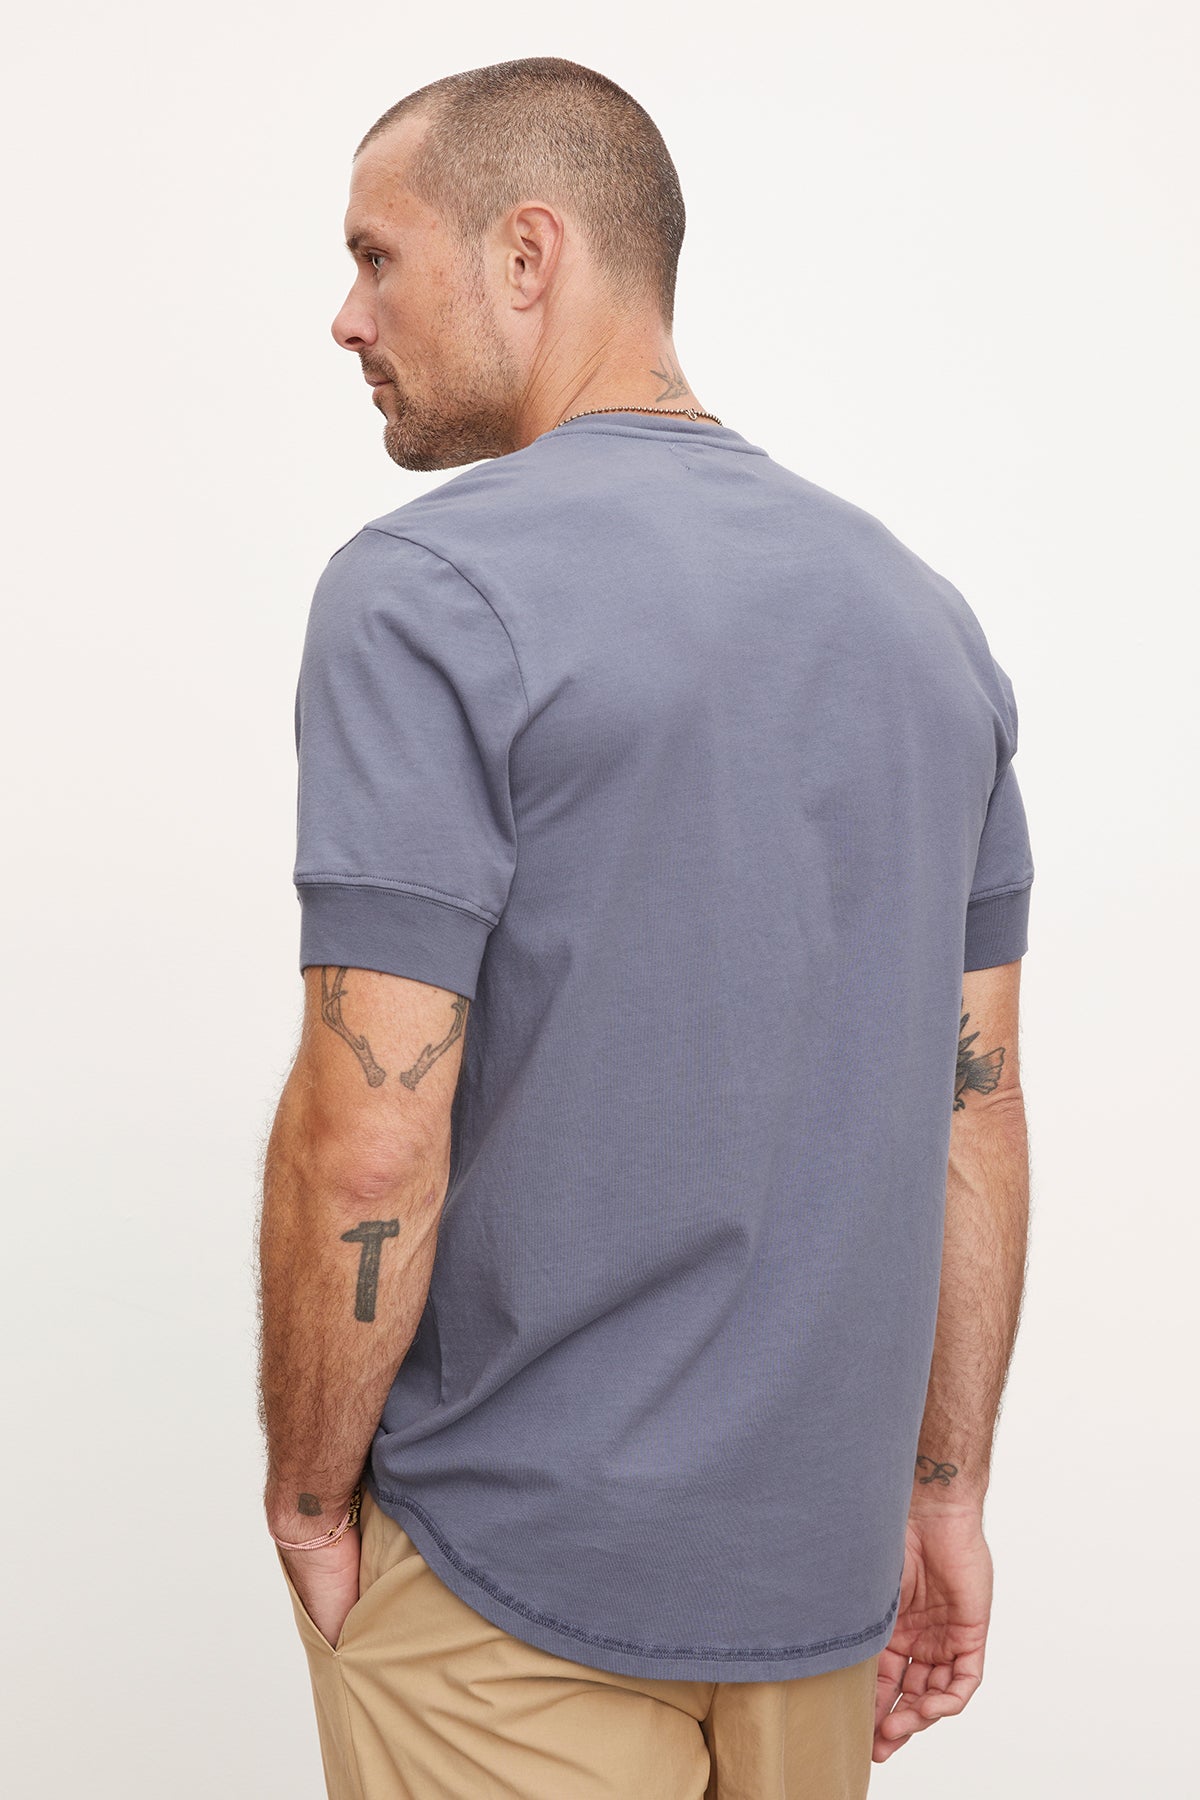 A man in a Velvet by Graham & Spencer DEON Henley t-shirt with scooped hem and beige pants, viewed from the side as he looks to the left, displaying tattoos on his arms.-36918612000961